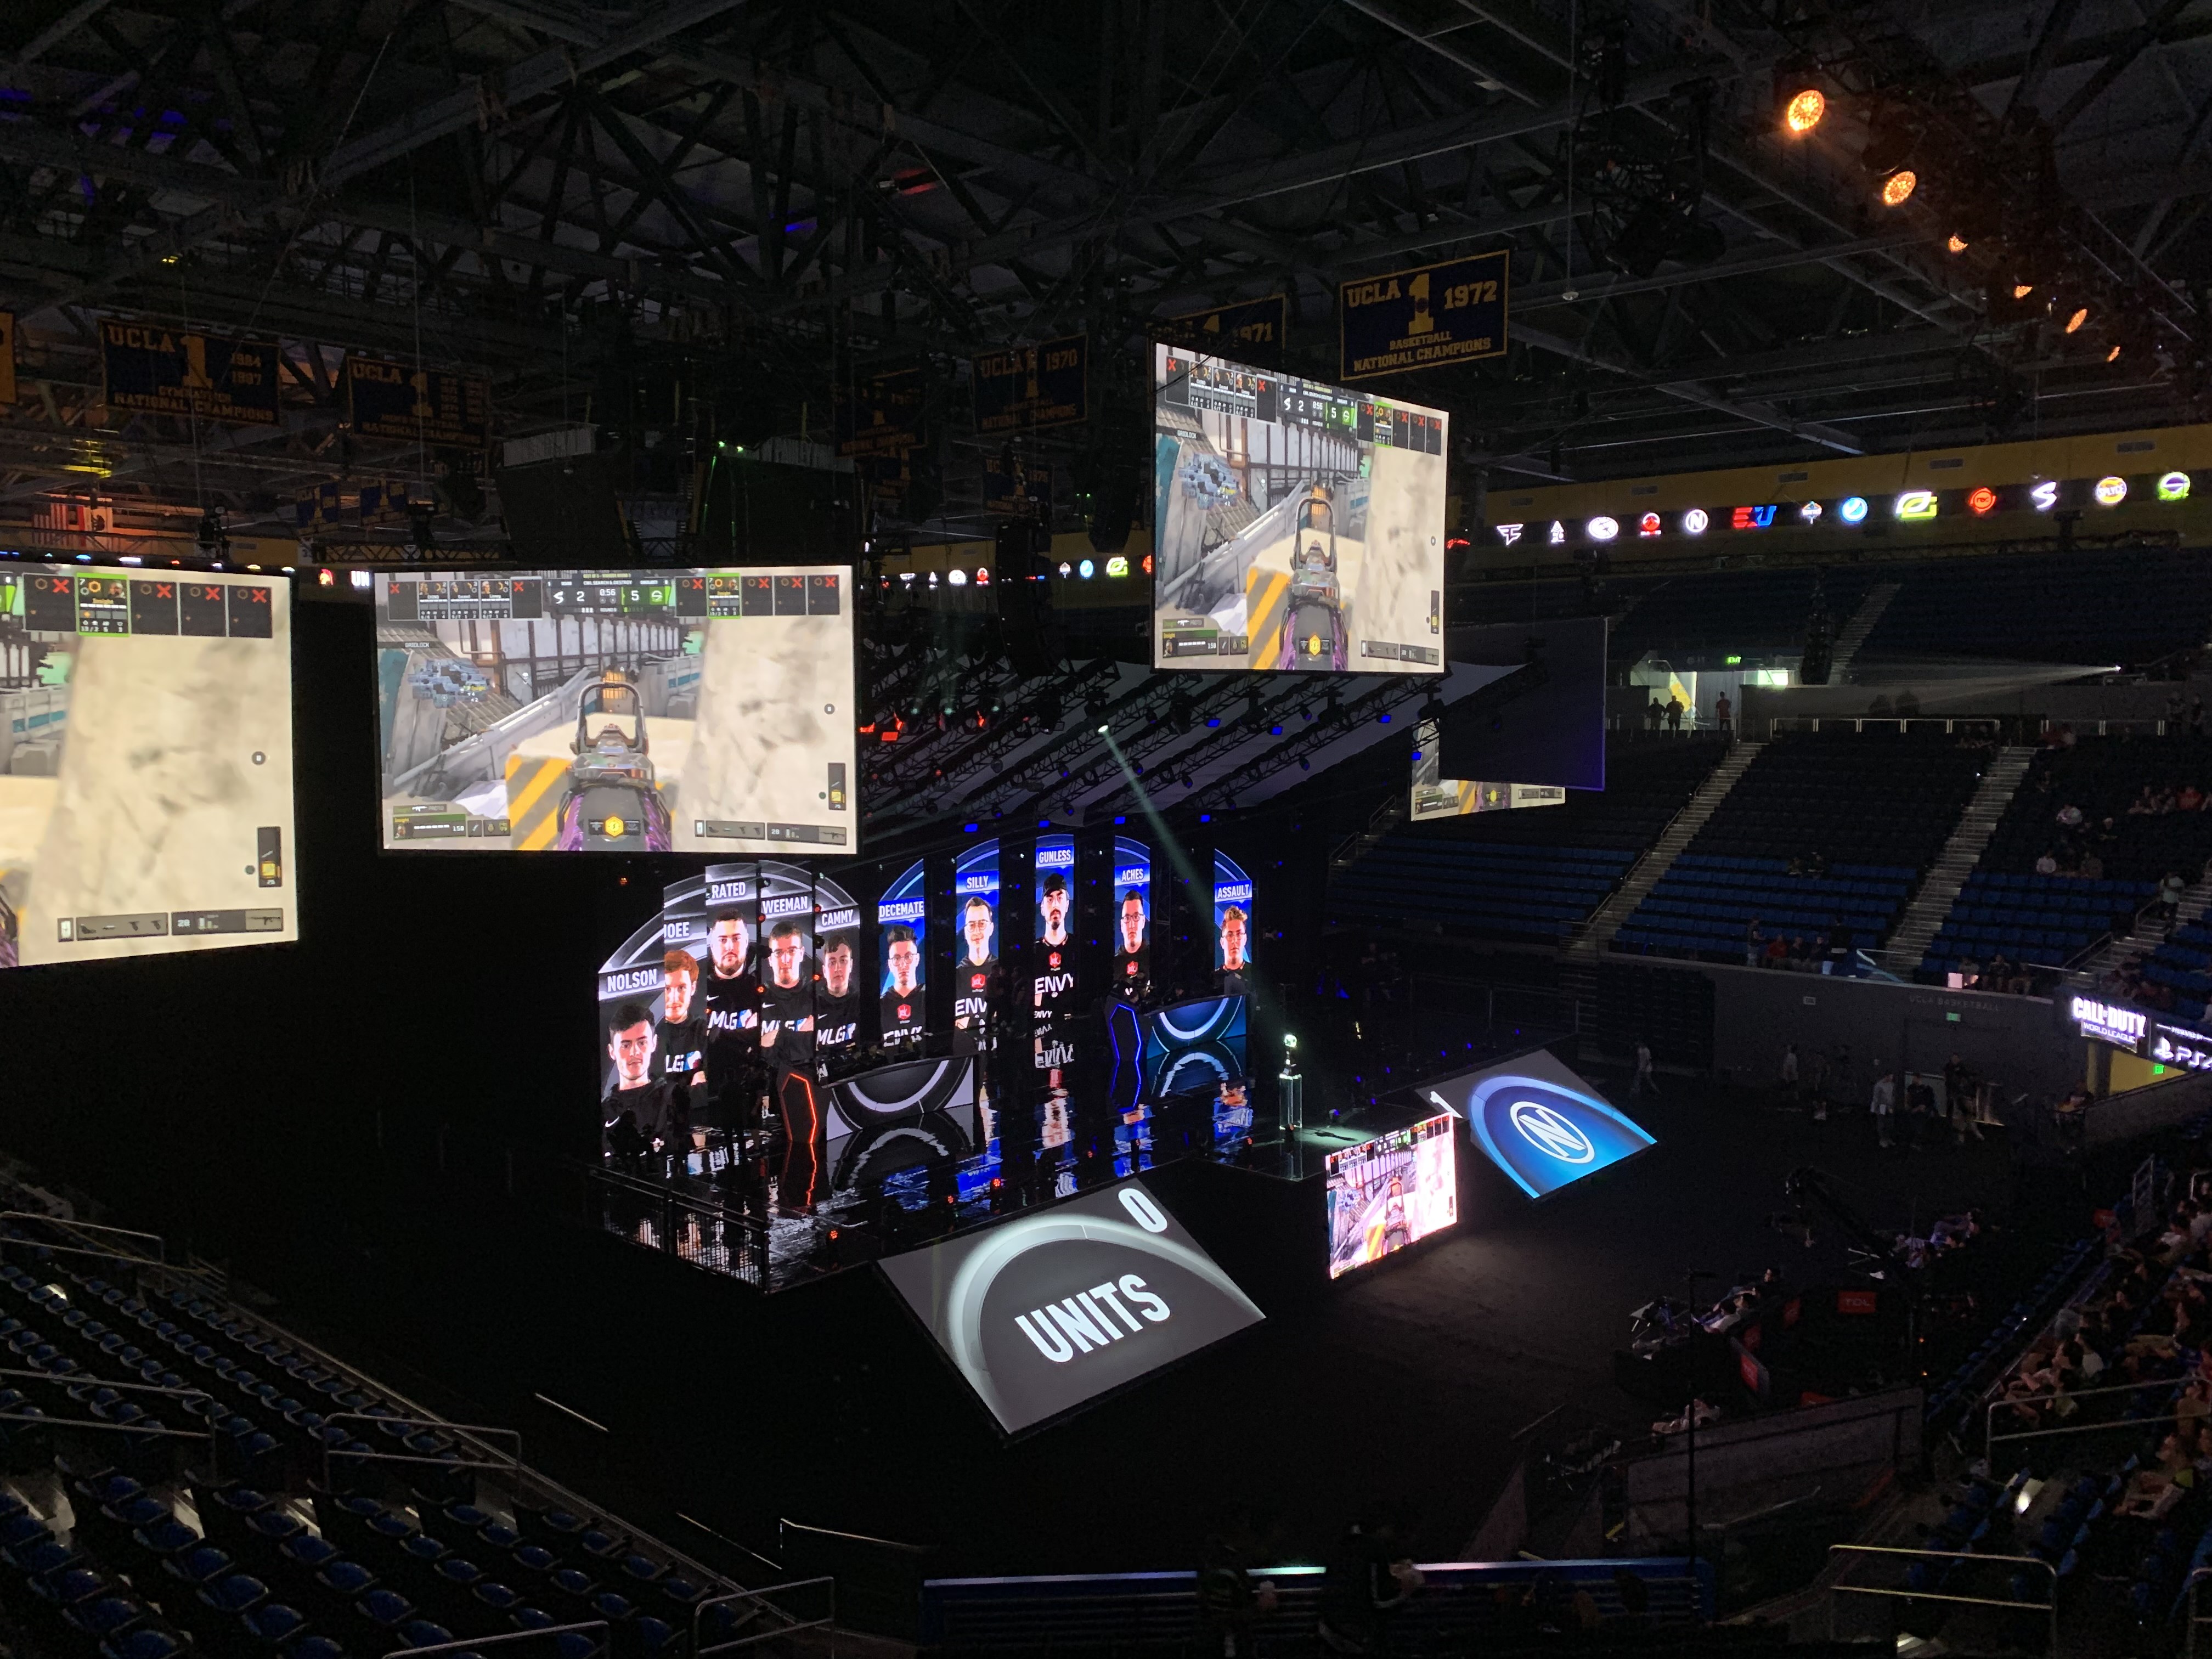 COD Champs results Standings, bracket, and more from CWL Champs